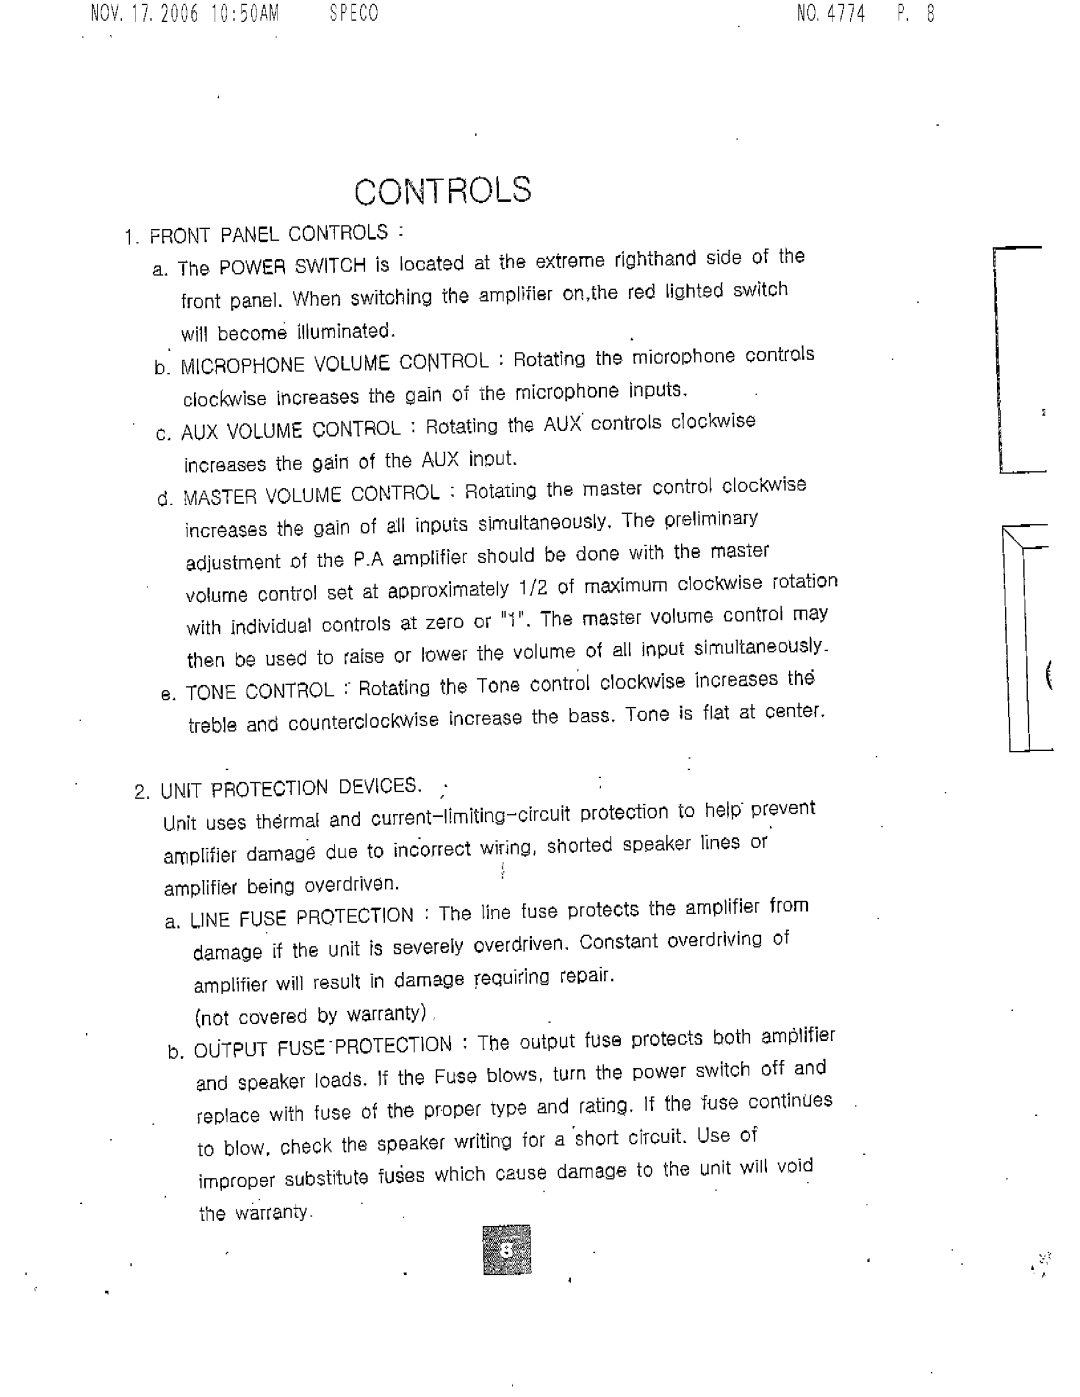 Speco Technologies P-30A instruction manual 